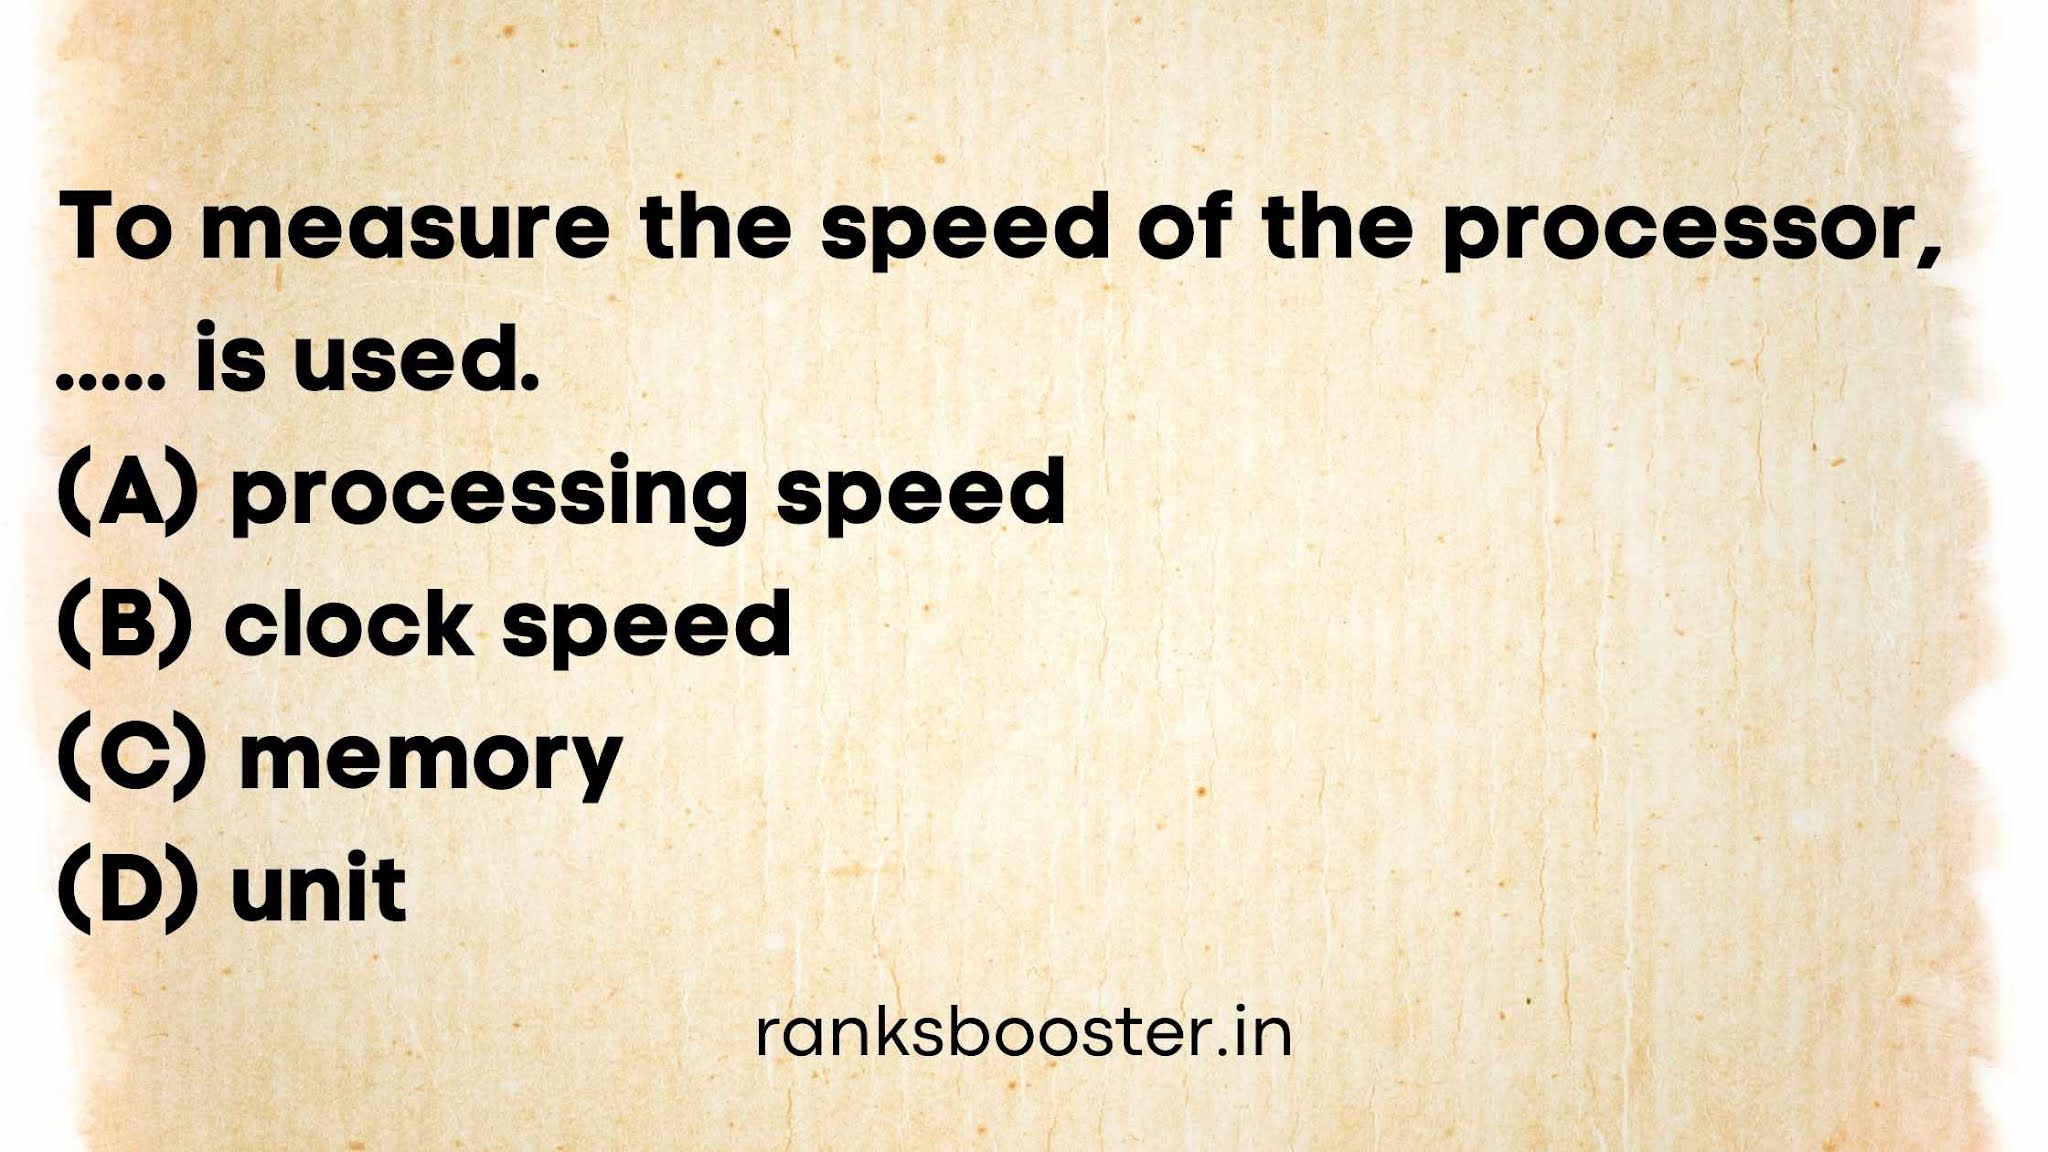 To measure the speed of the processor ..... is used. (A) processing speed (B) clock speed (C) memory (D) unit